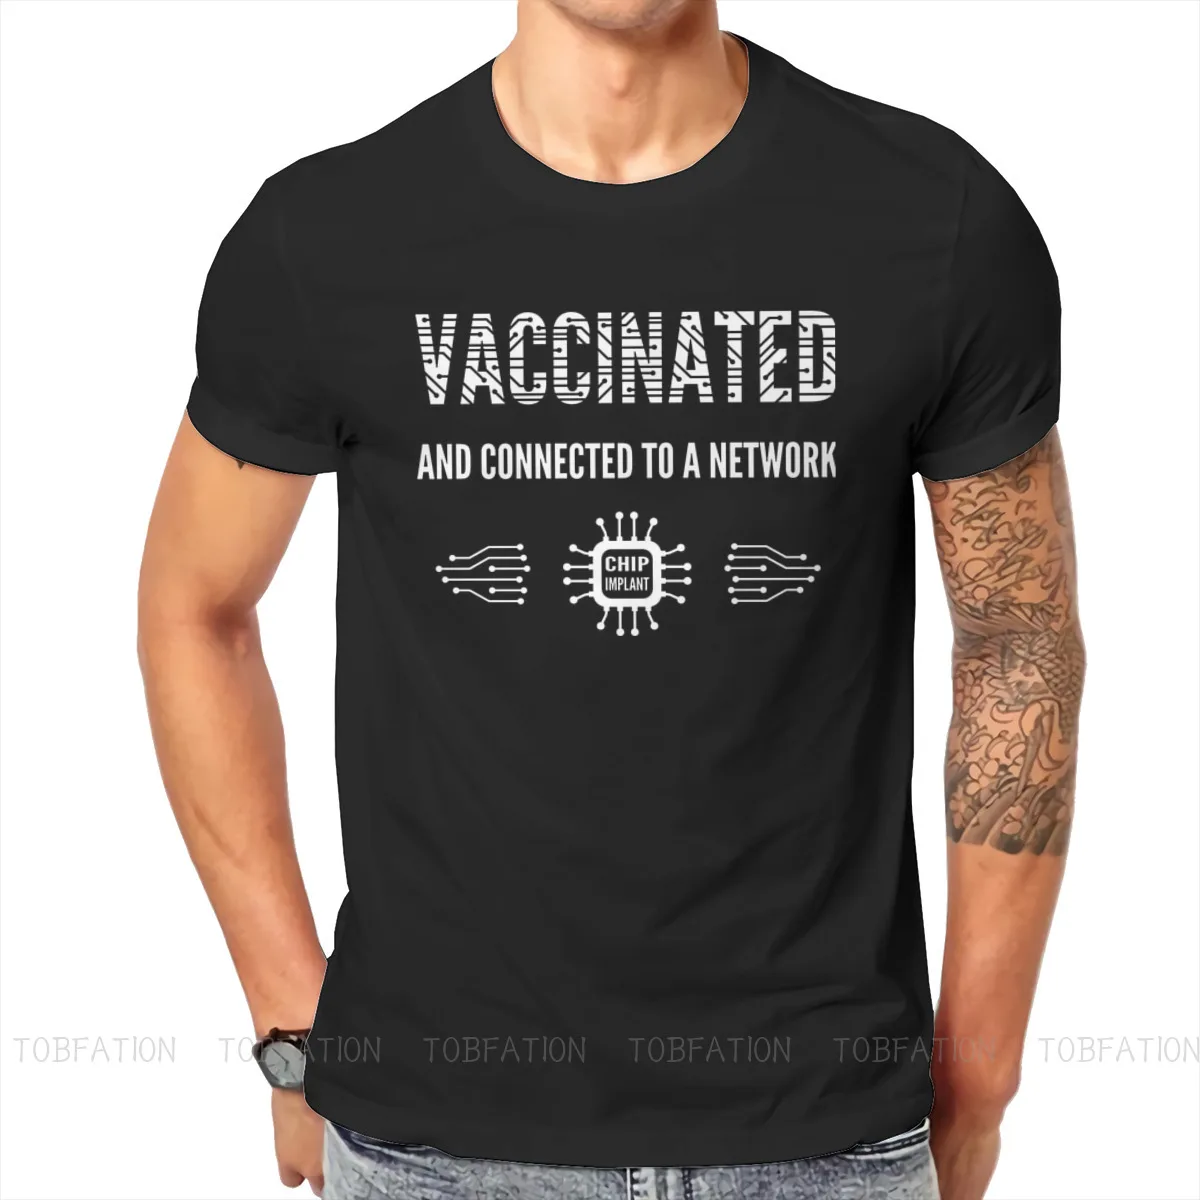 

Vaccinated Connected To a Network Men TShirt Vaccine Meme Crewneck Tops Fabric T Shirt Funny Top Quality Gift Idea